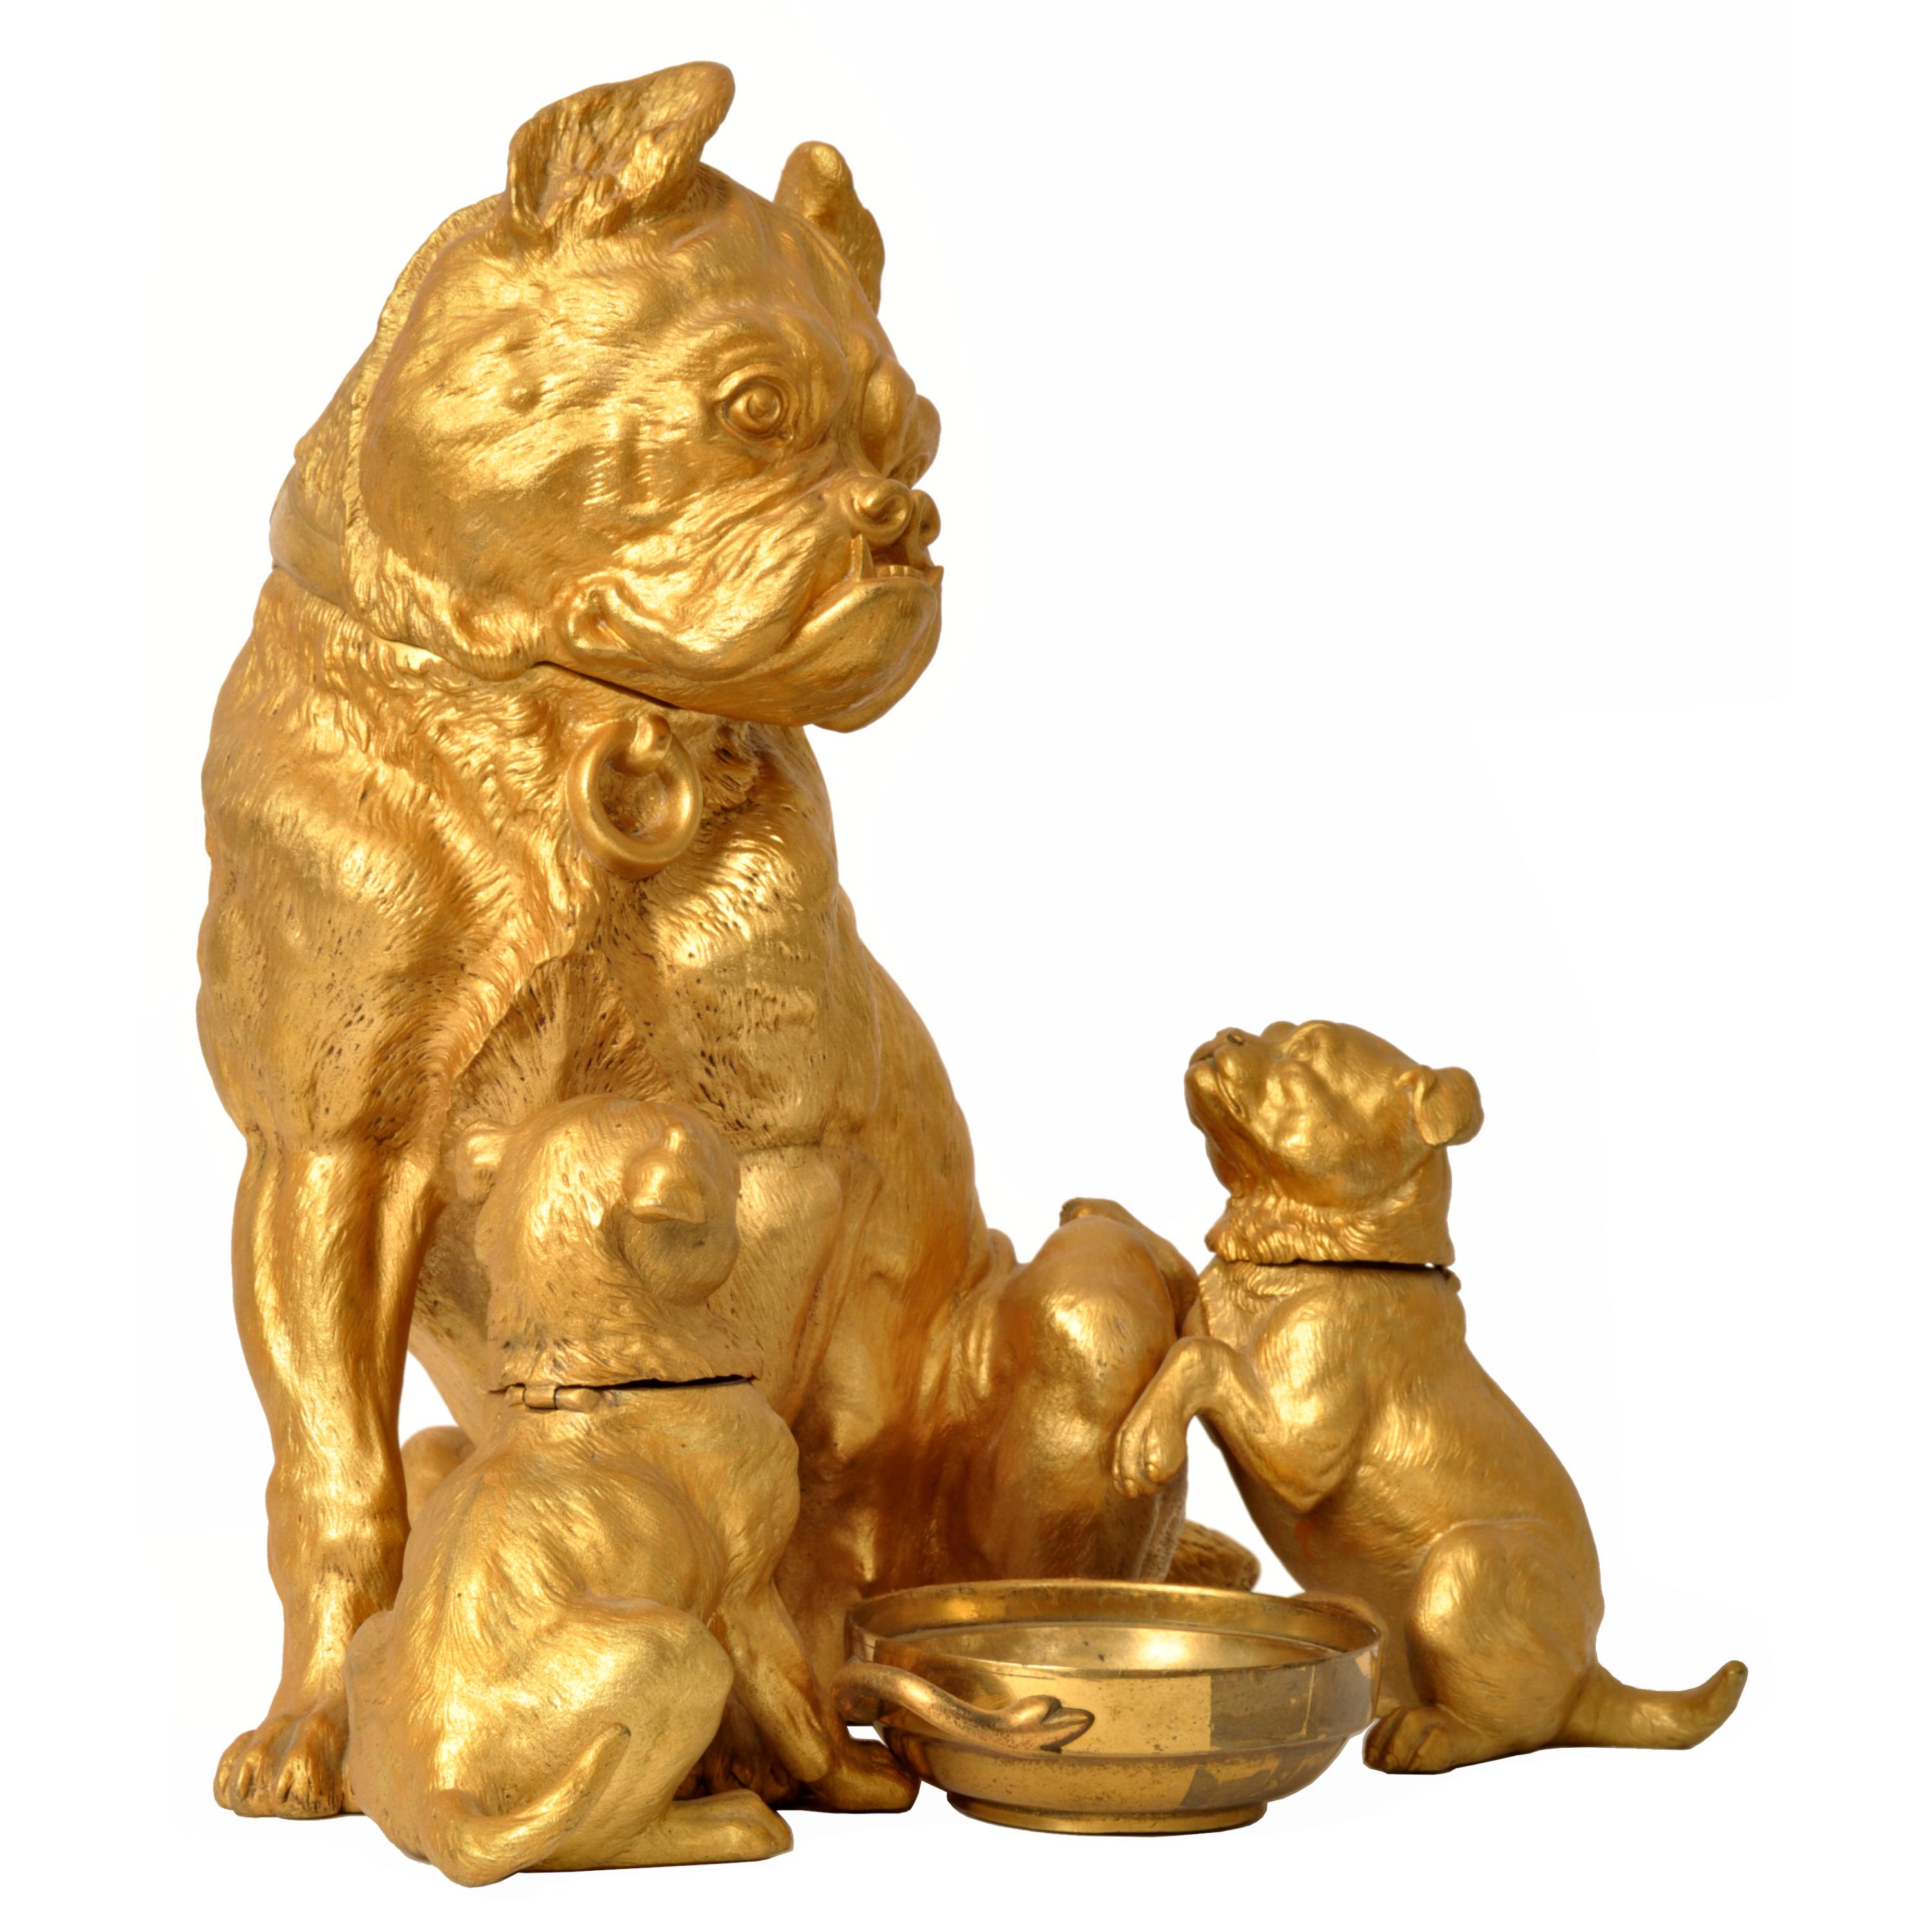 A large and rare antique Austrian gilded bronze desk set/sculpture, modeled as a Pug dogs with her two puppies, documented, circa 1910.
To the center is a mother pug flanked by two pug pups, they sit before an empty handled feeding bowl. The heads